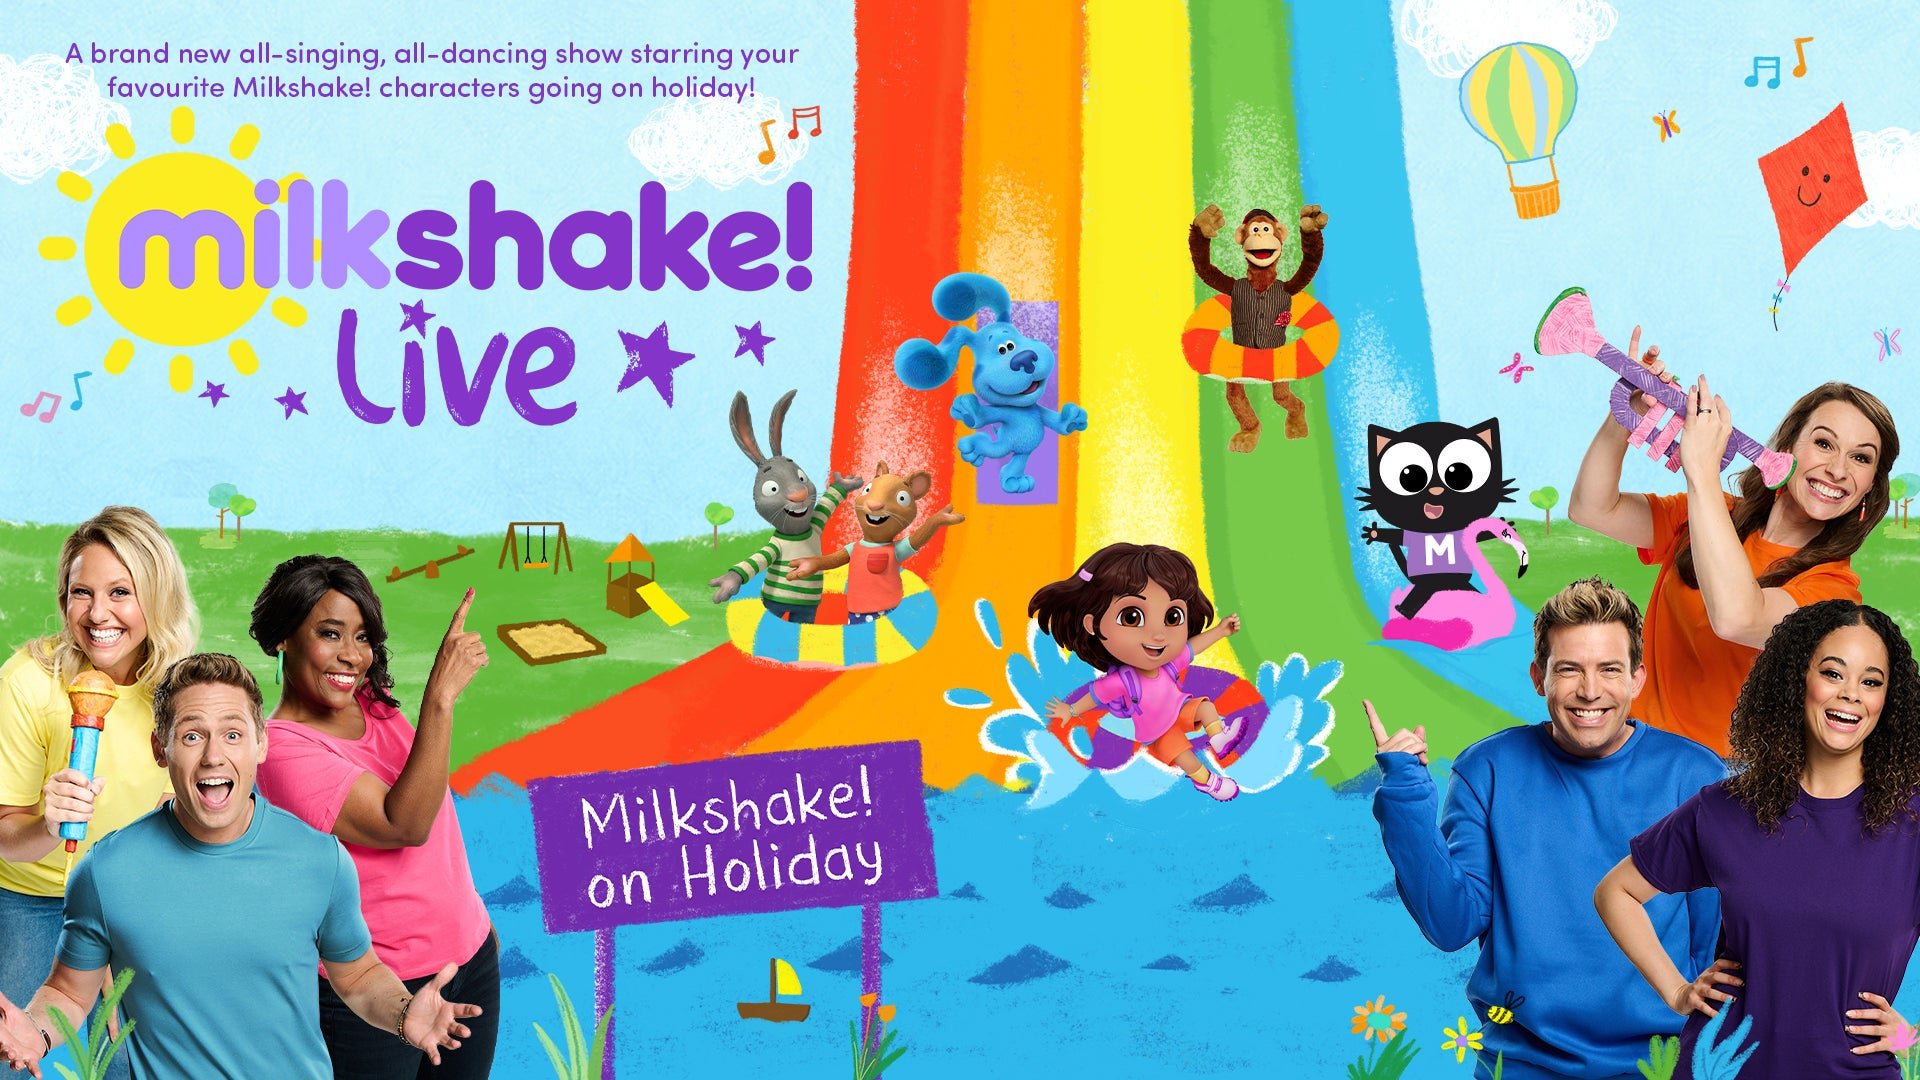 Image name Milkshake Live on Holiday at Scarborough Spa Theatre Scarborough the 15 image from the post Milkshake! Live on Holiday at Scarborough Spa Grand Hall, Scarborough in Yorkshire.com.